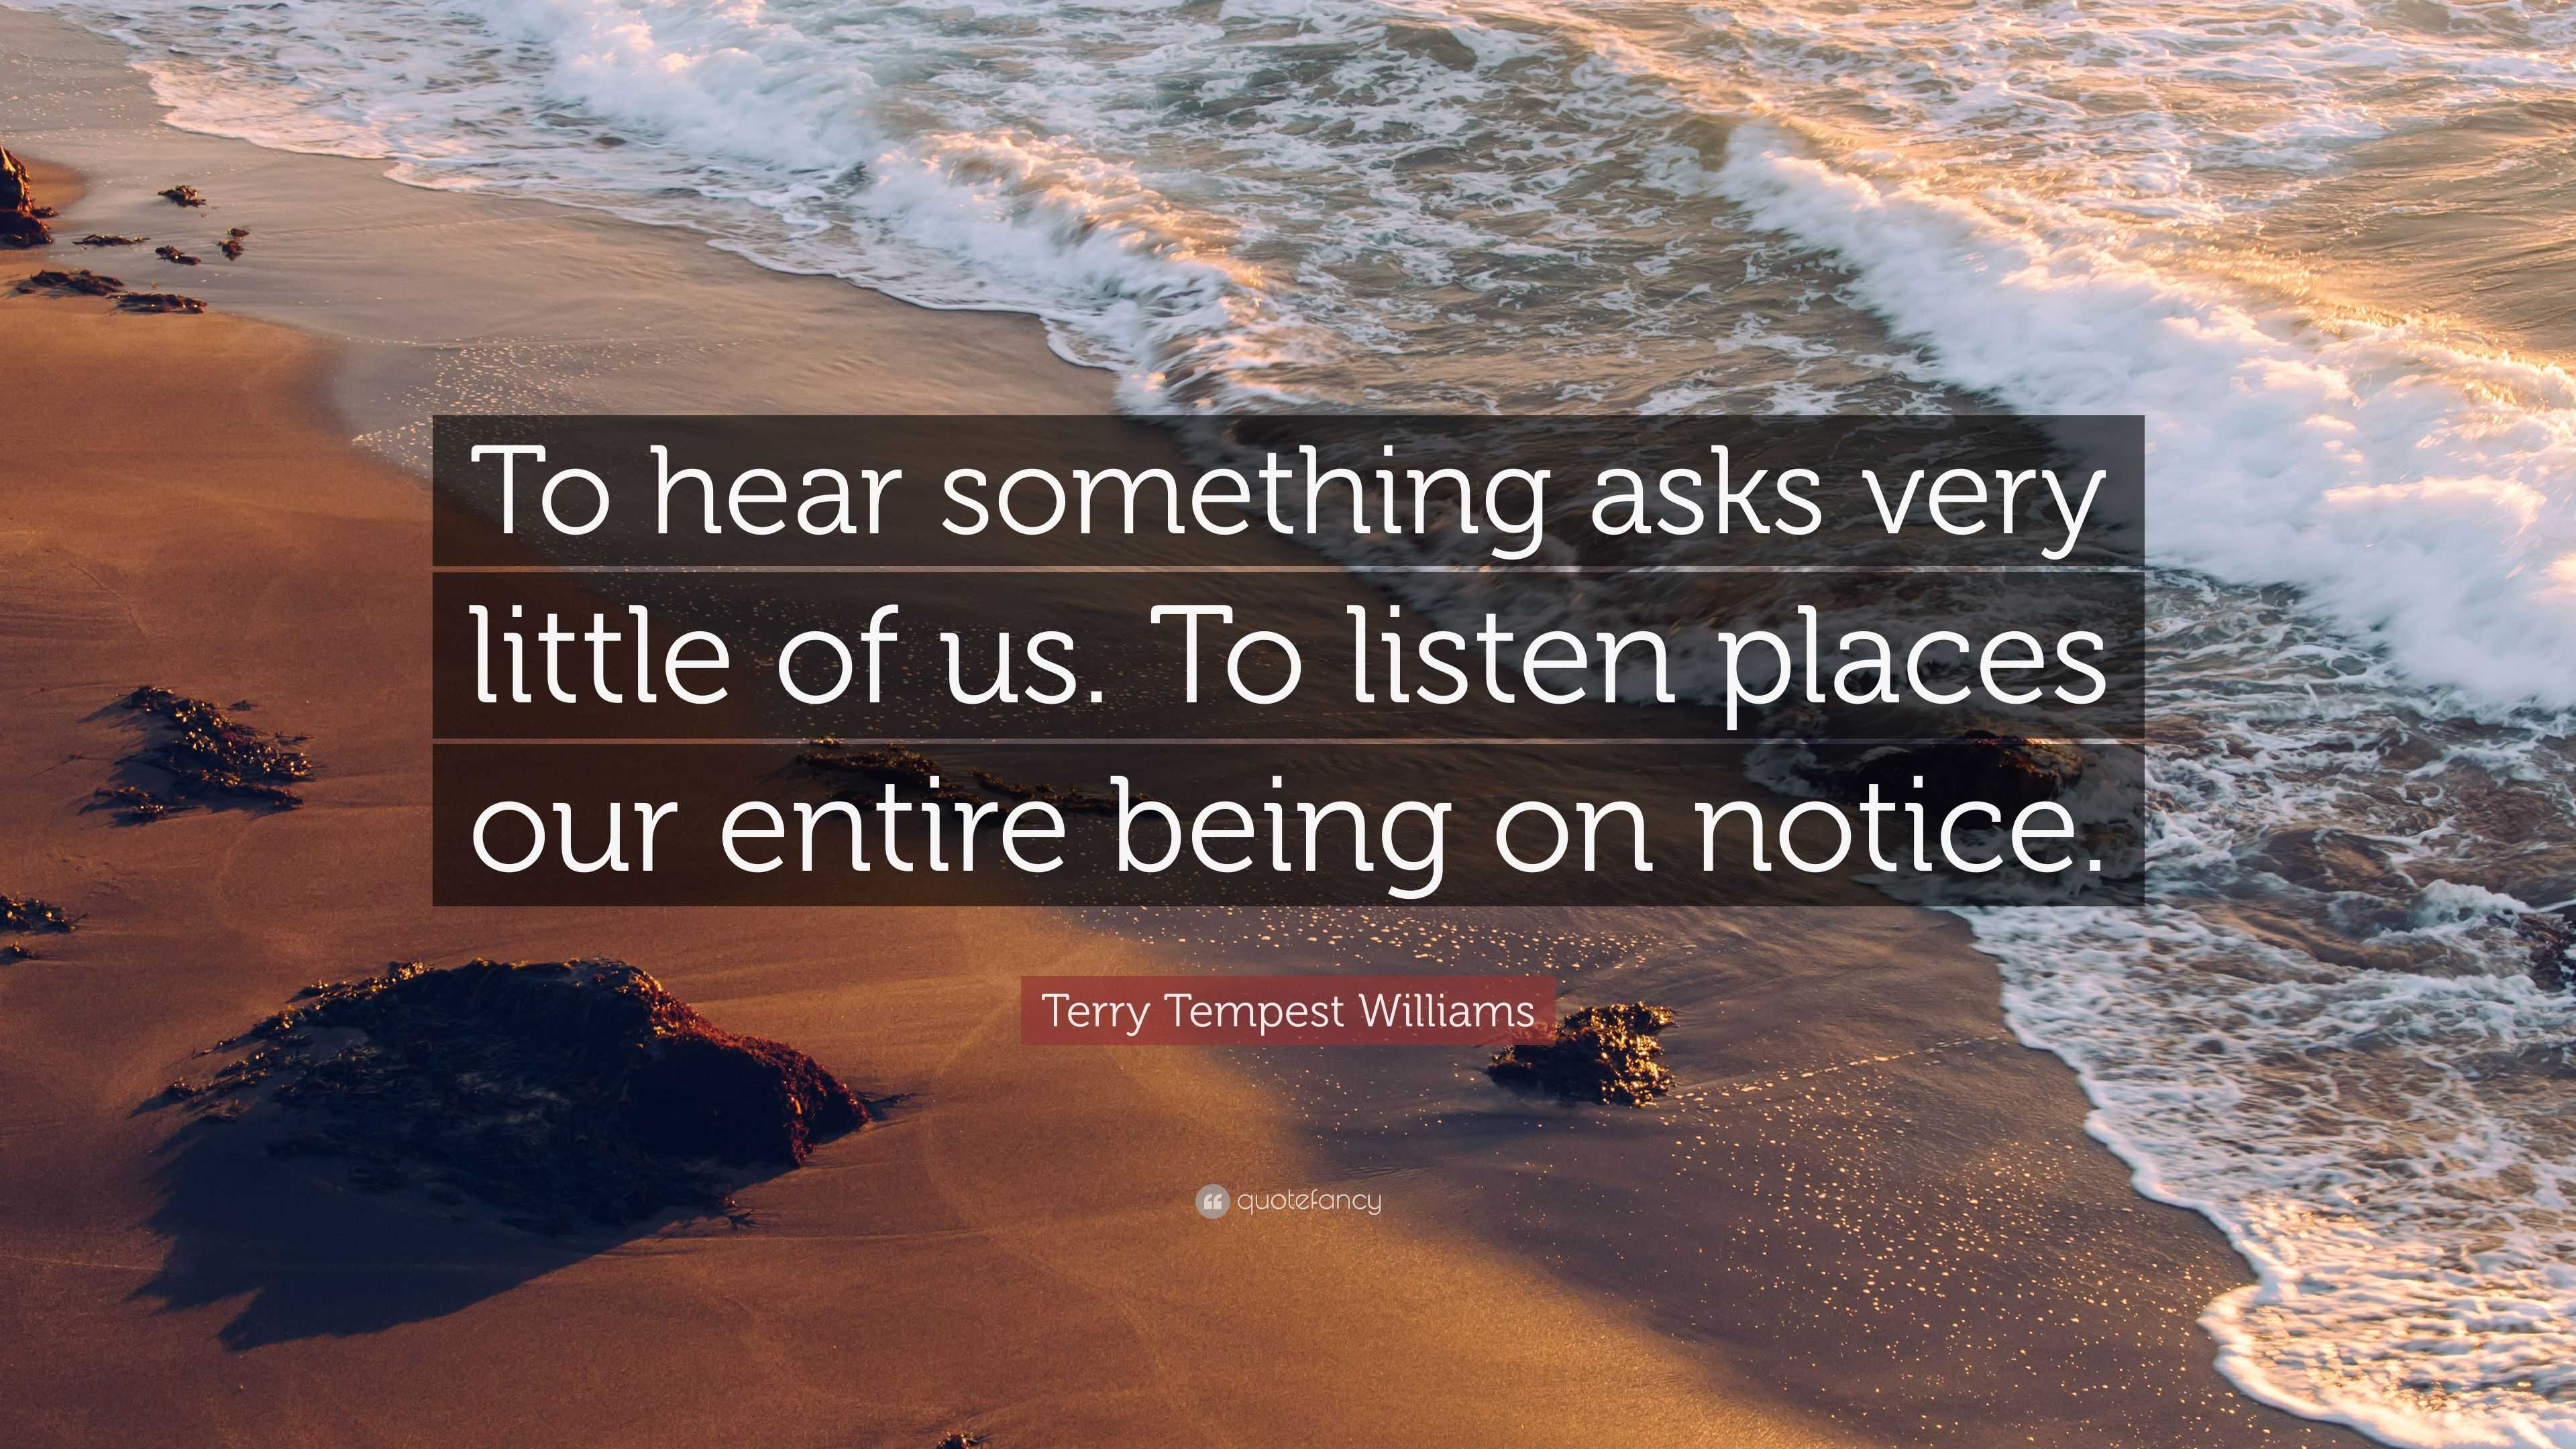 Terry Tempest Williams Quote: “To hear something asks very little of us ...